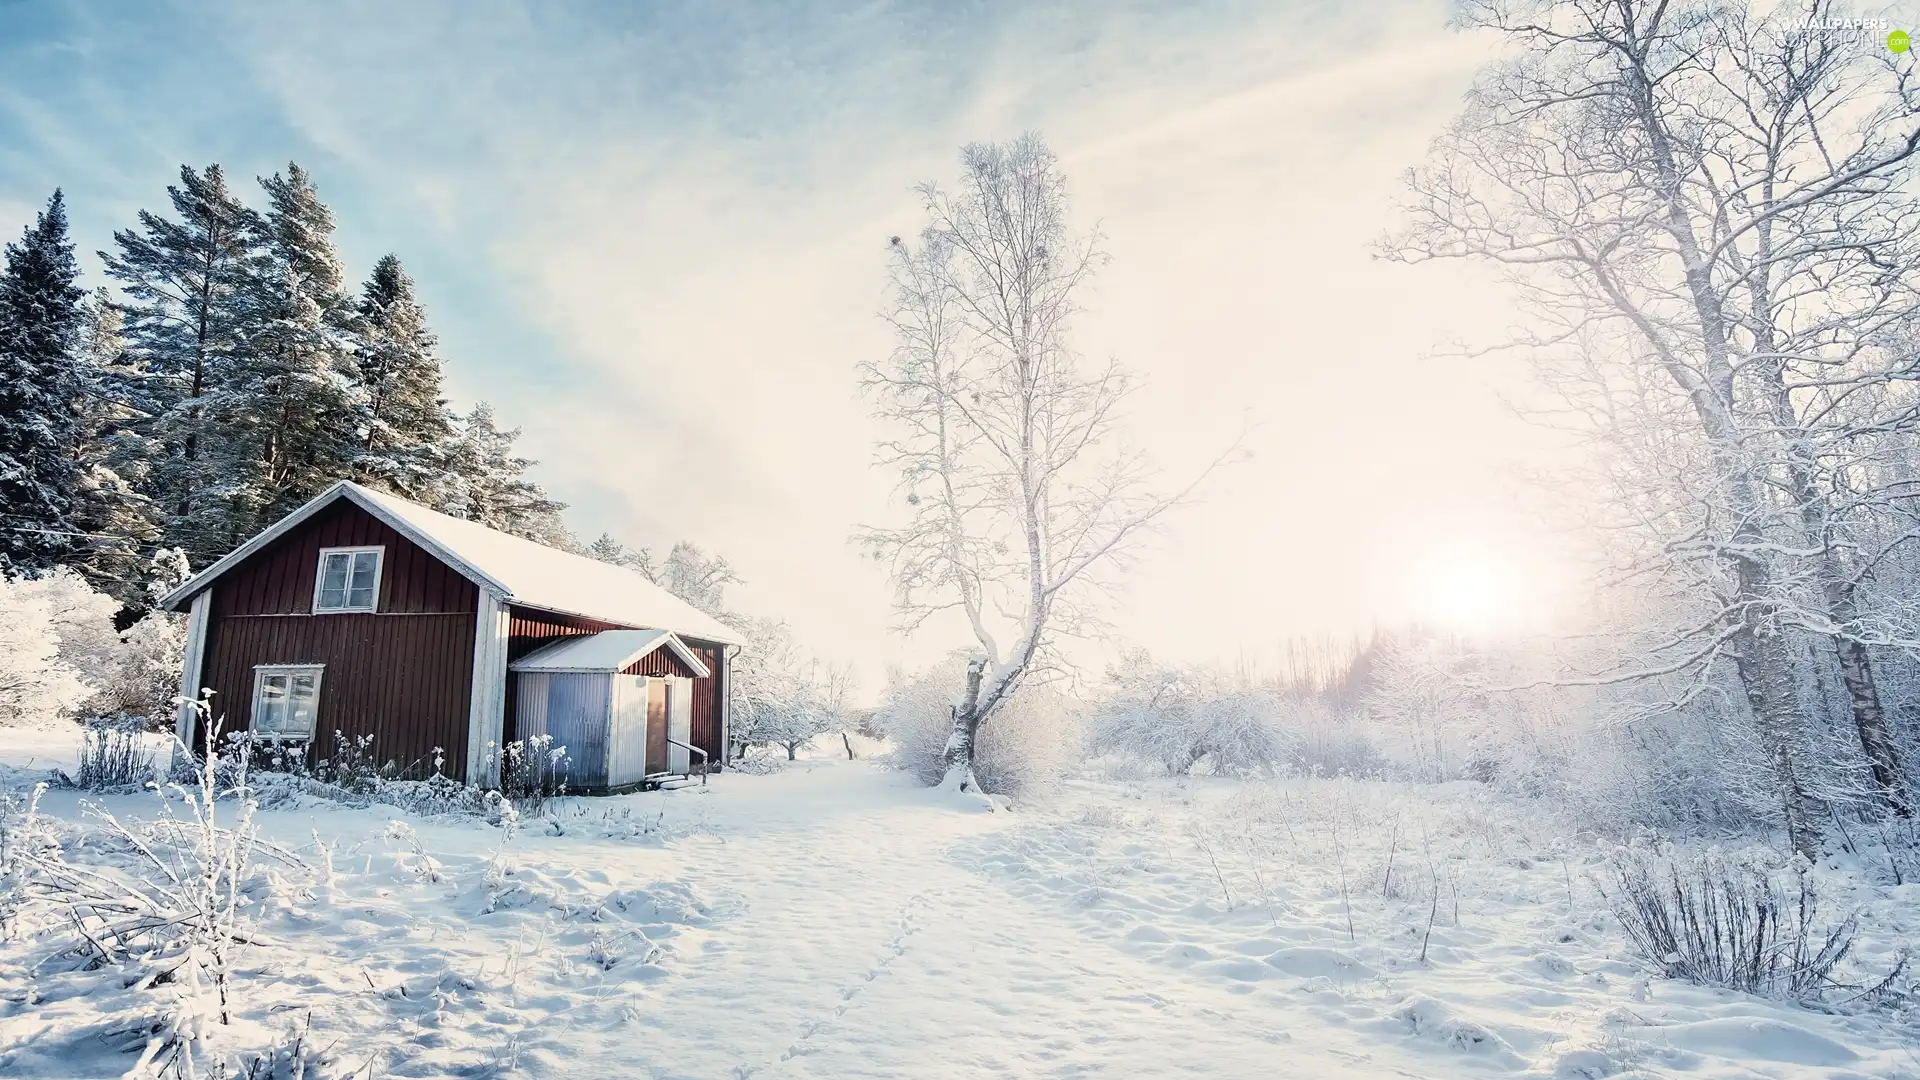 viewes, winter, Way, Sunrise, house, trees